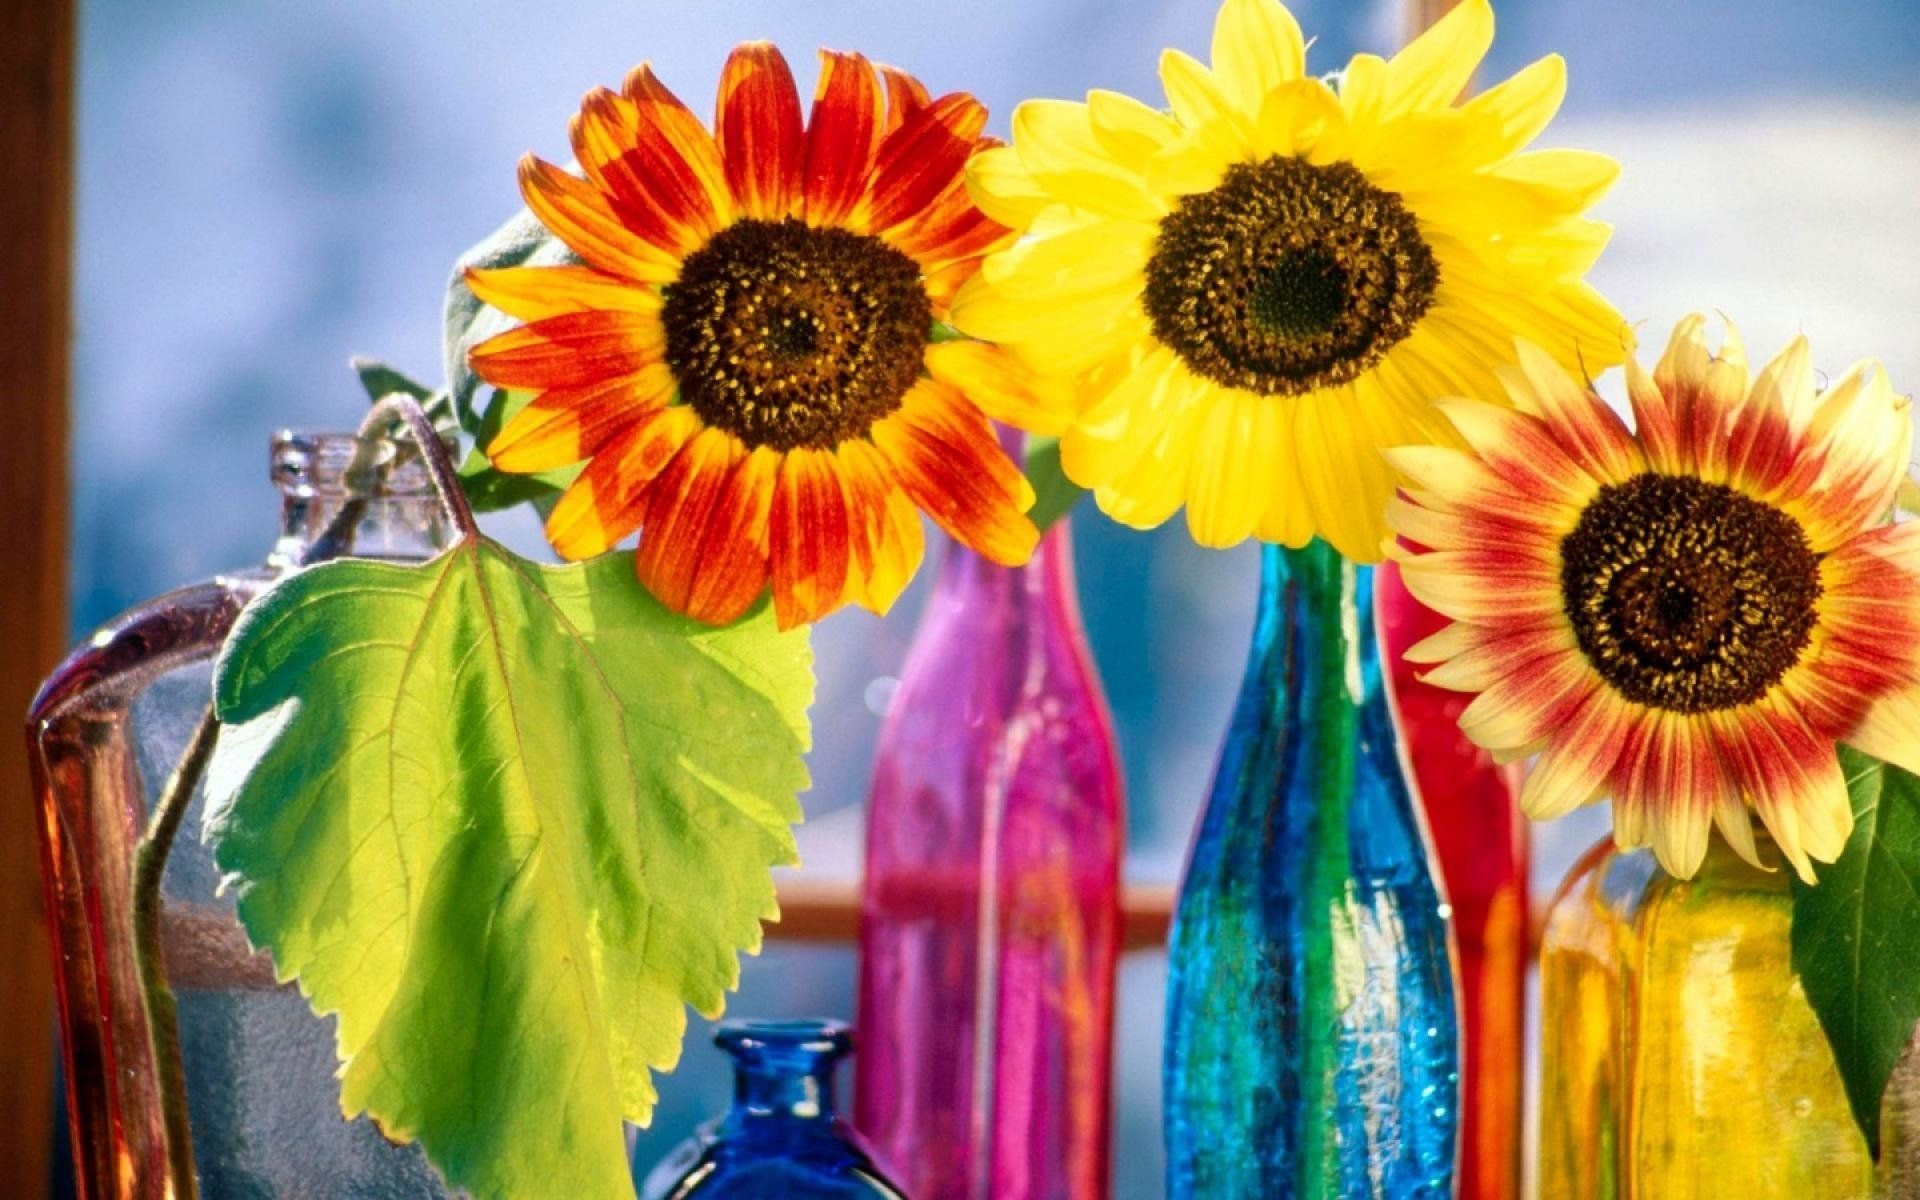 Sunflowers in Vases HD Wallpaper. Background Imagex1200